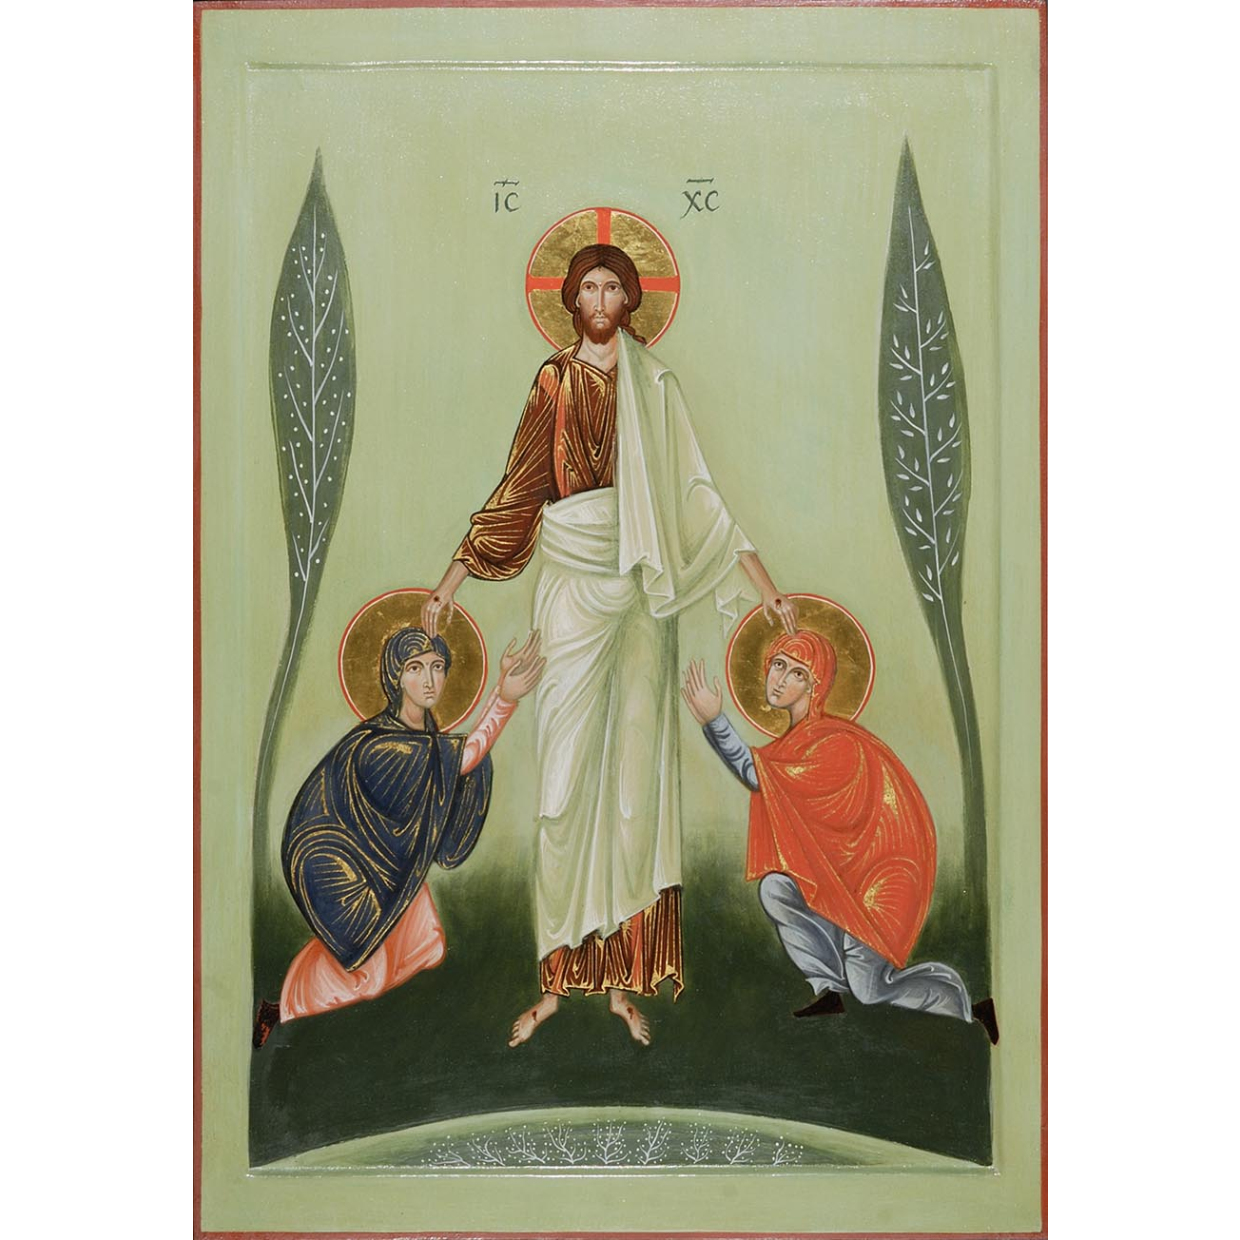 The Appearing of Christ to the Holy Women